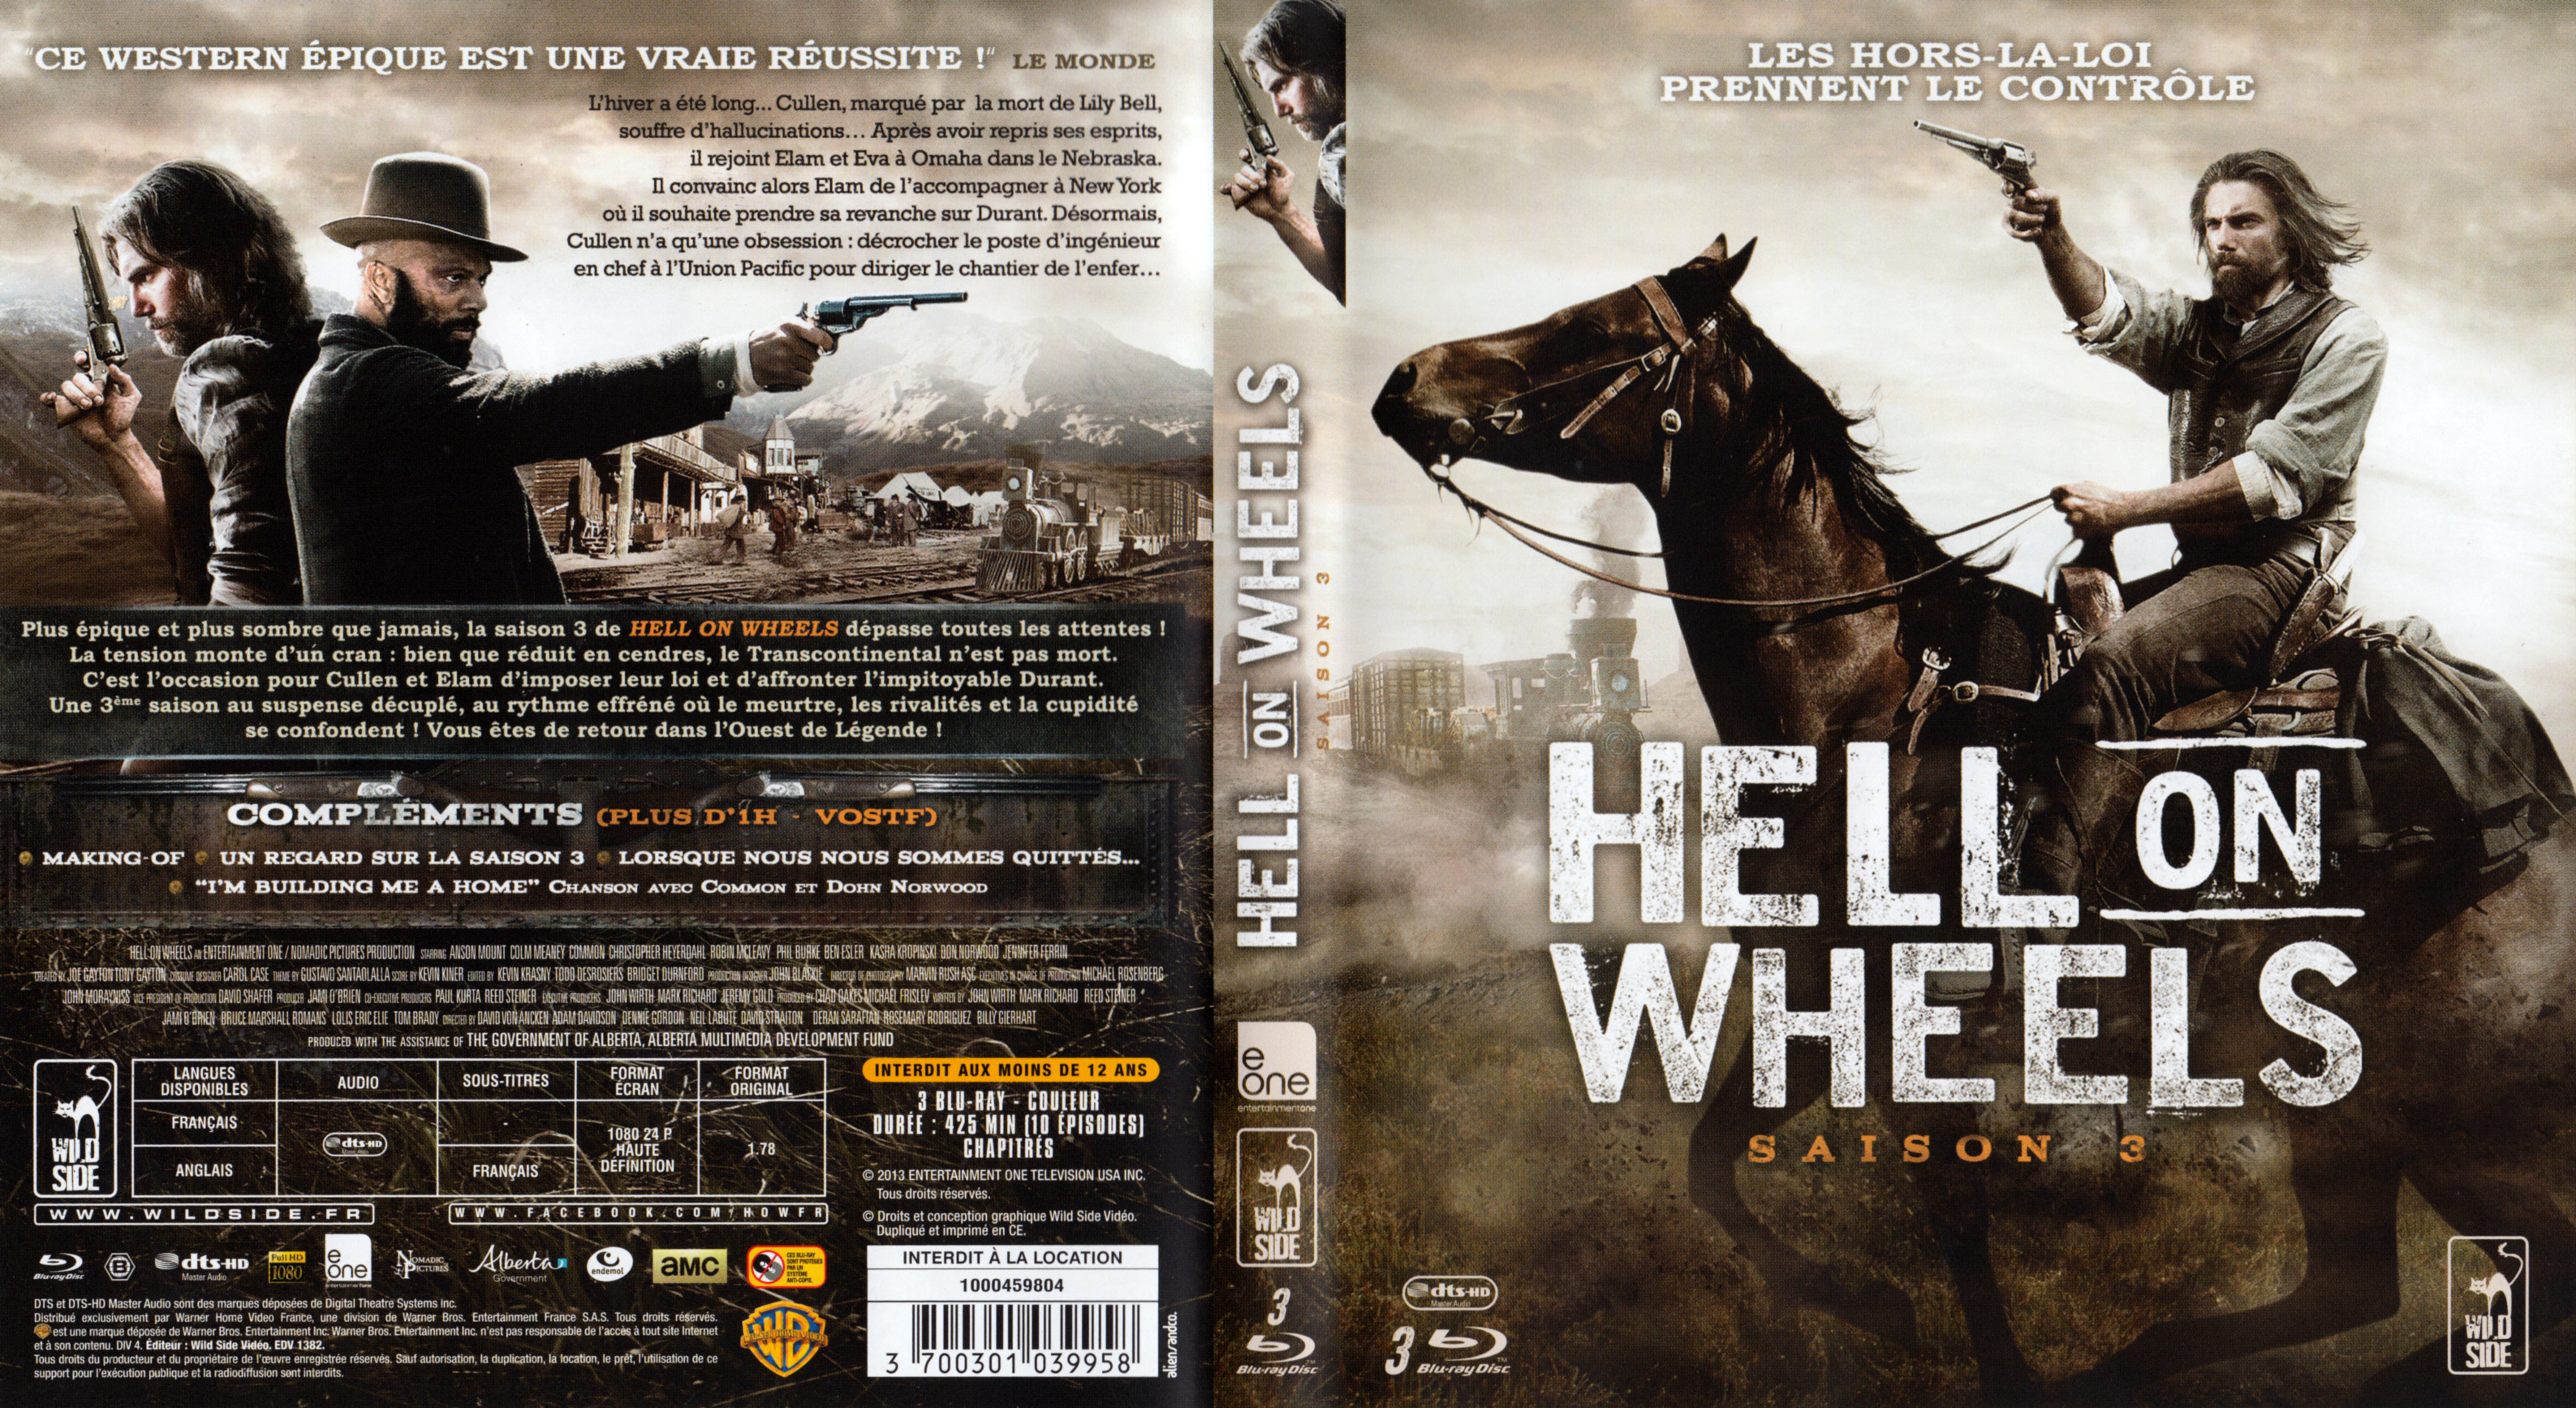 Jaquette DVD Hell on Wheels Saison 3 (BLU-RAY)